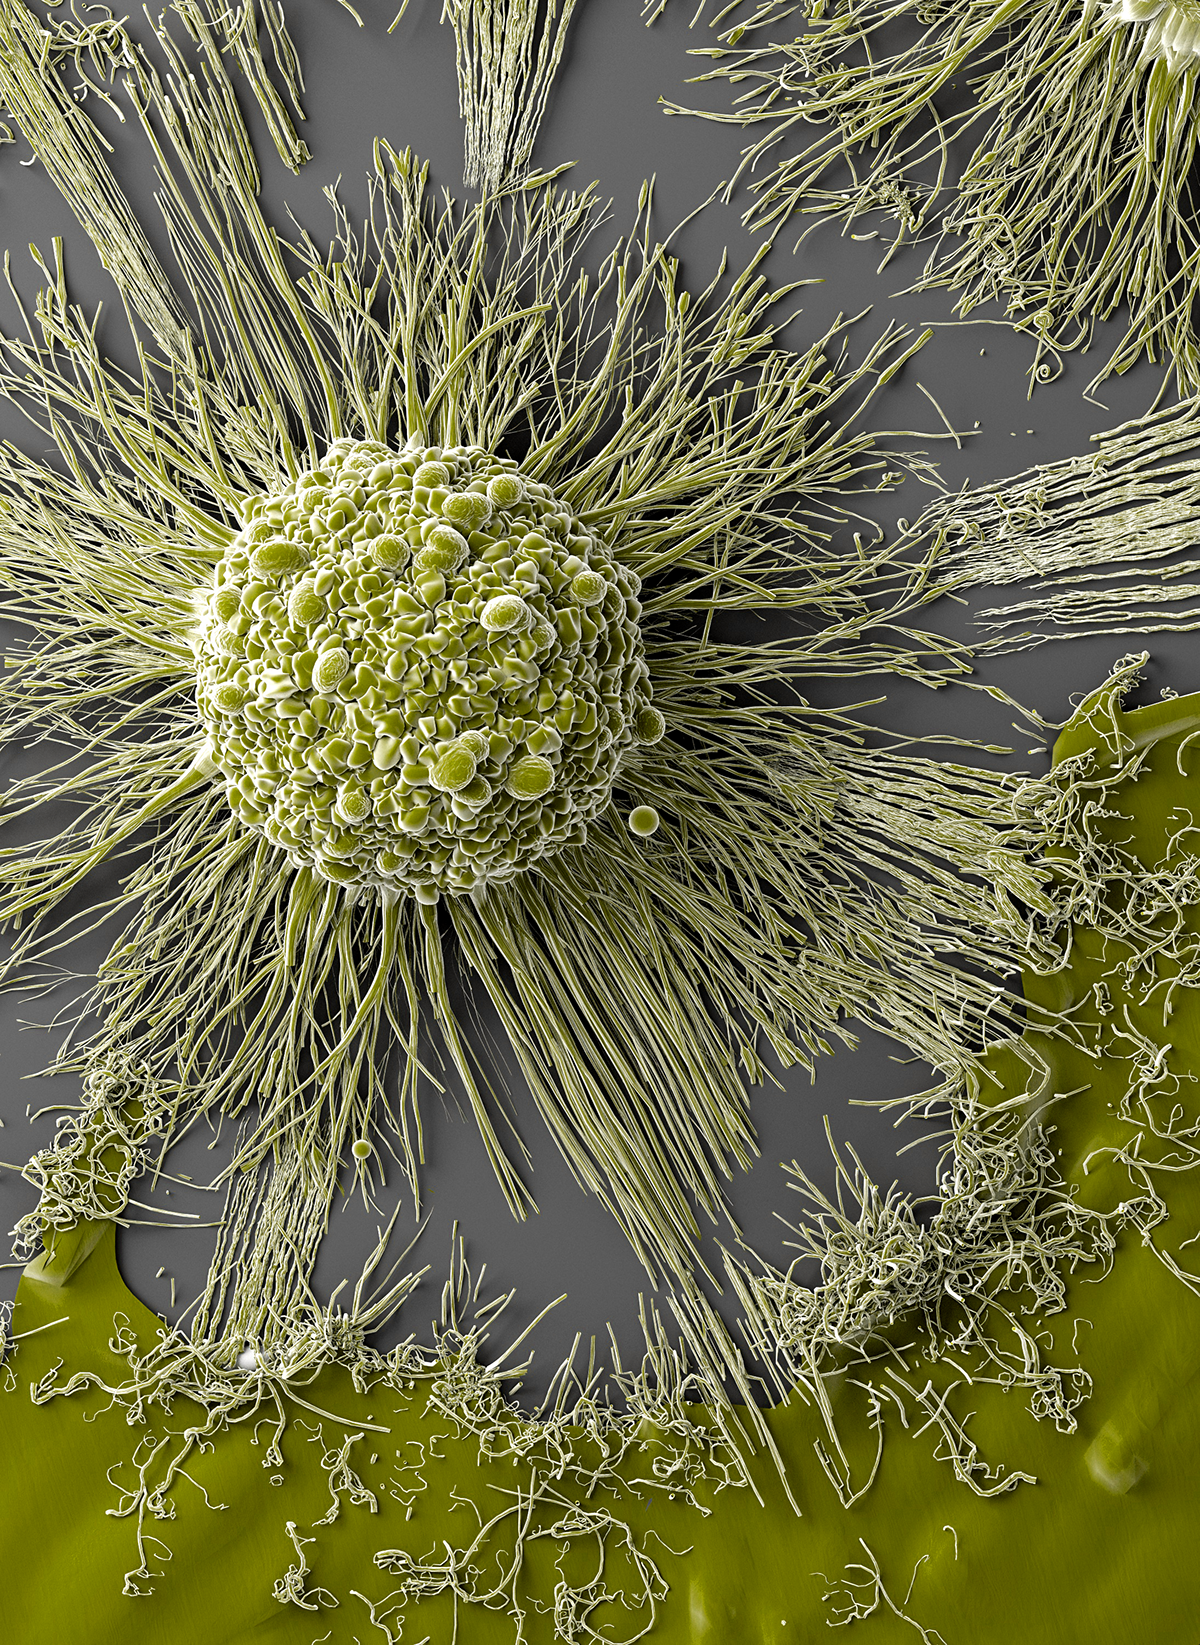 Cancer Cell Division on Behance45256b77860021.5c93c1e5e82f5.png